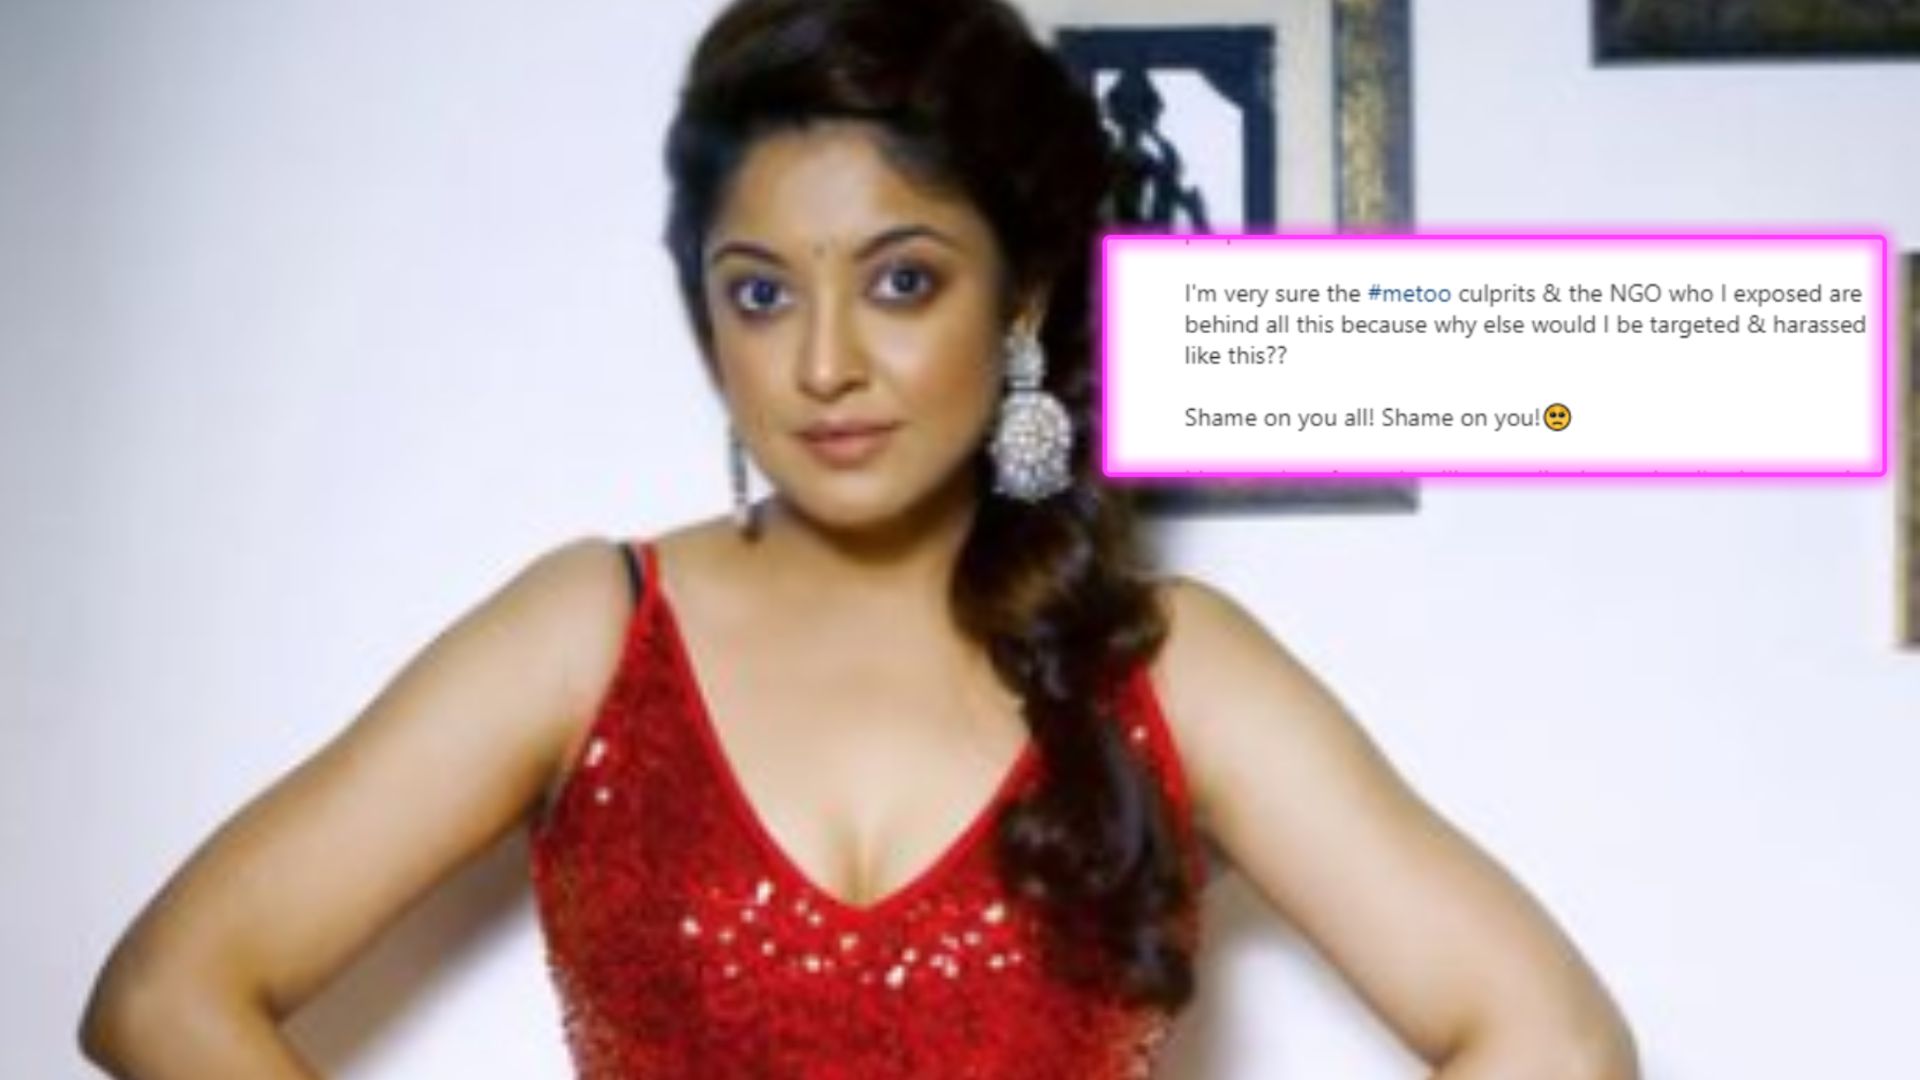 Tanushree Dutta Shares A Mysterious Post About Being Harassd By The “Bollywood Mafias”